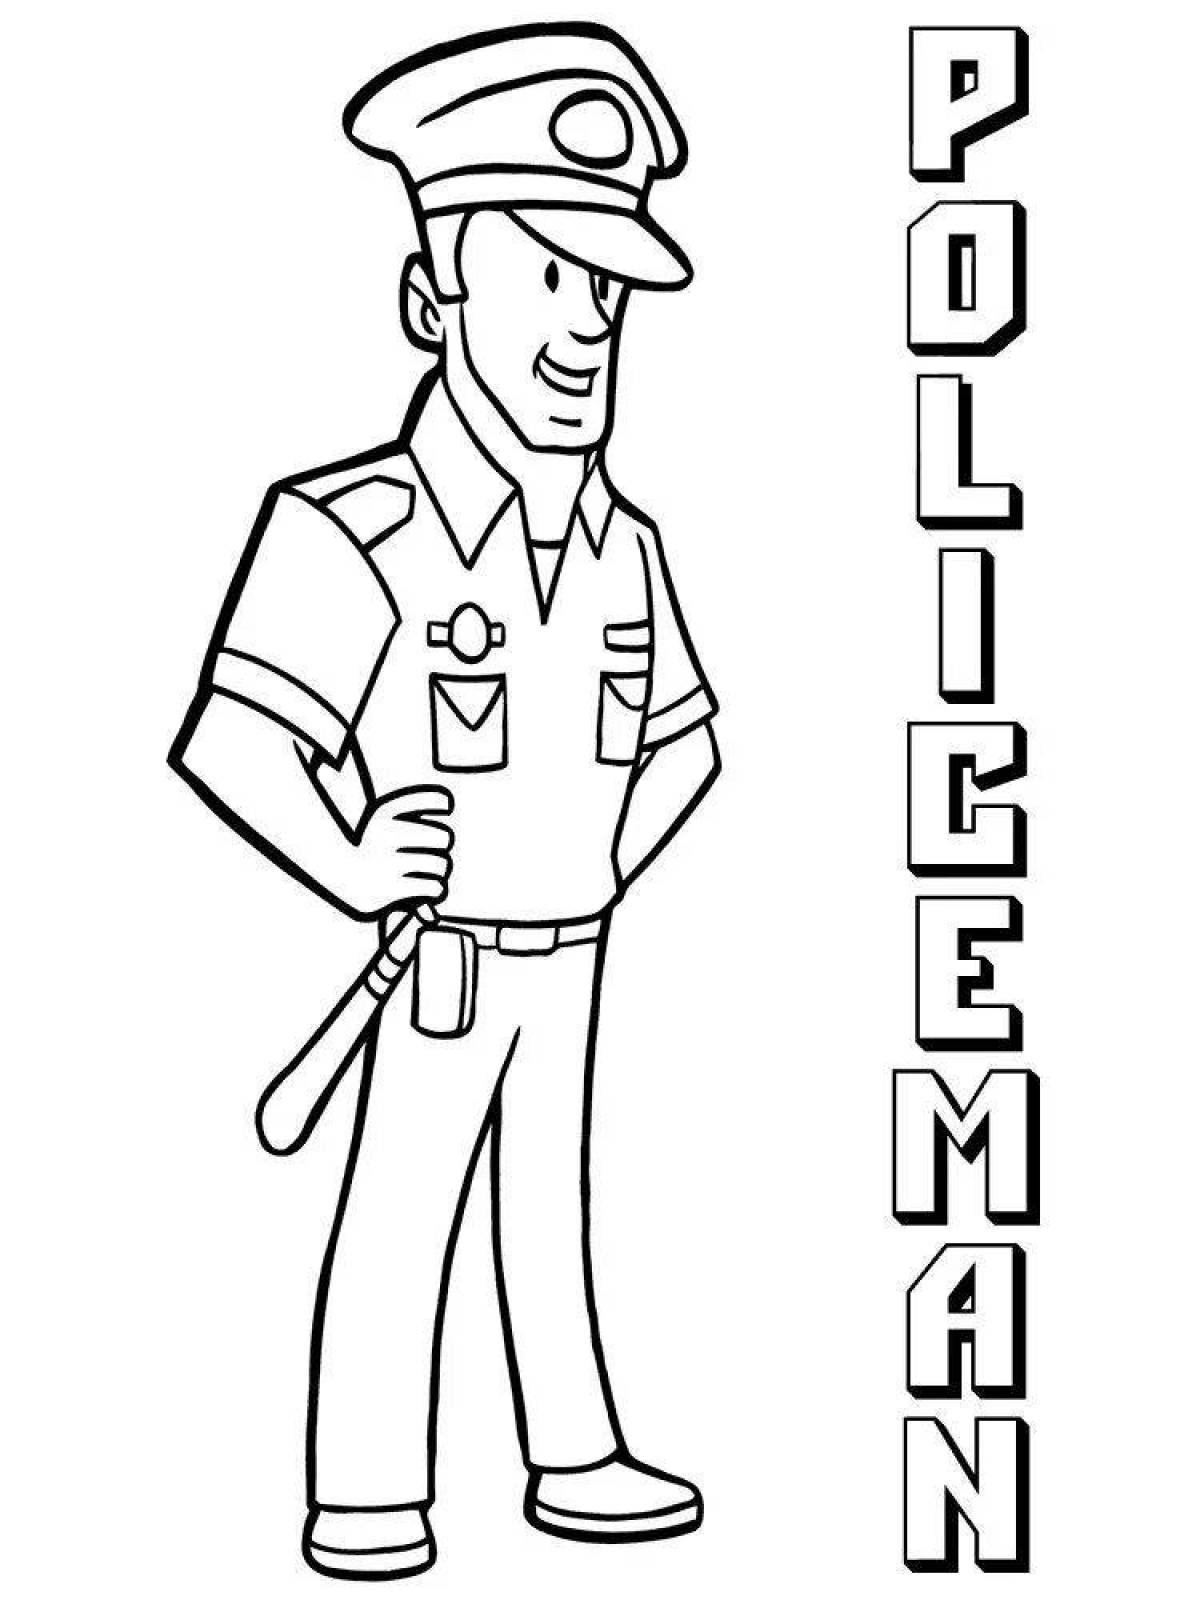 Useful police coloring book